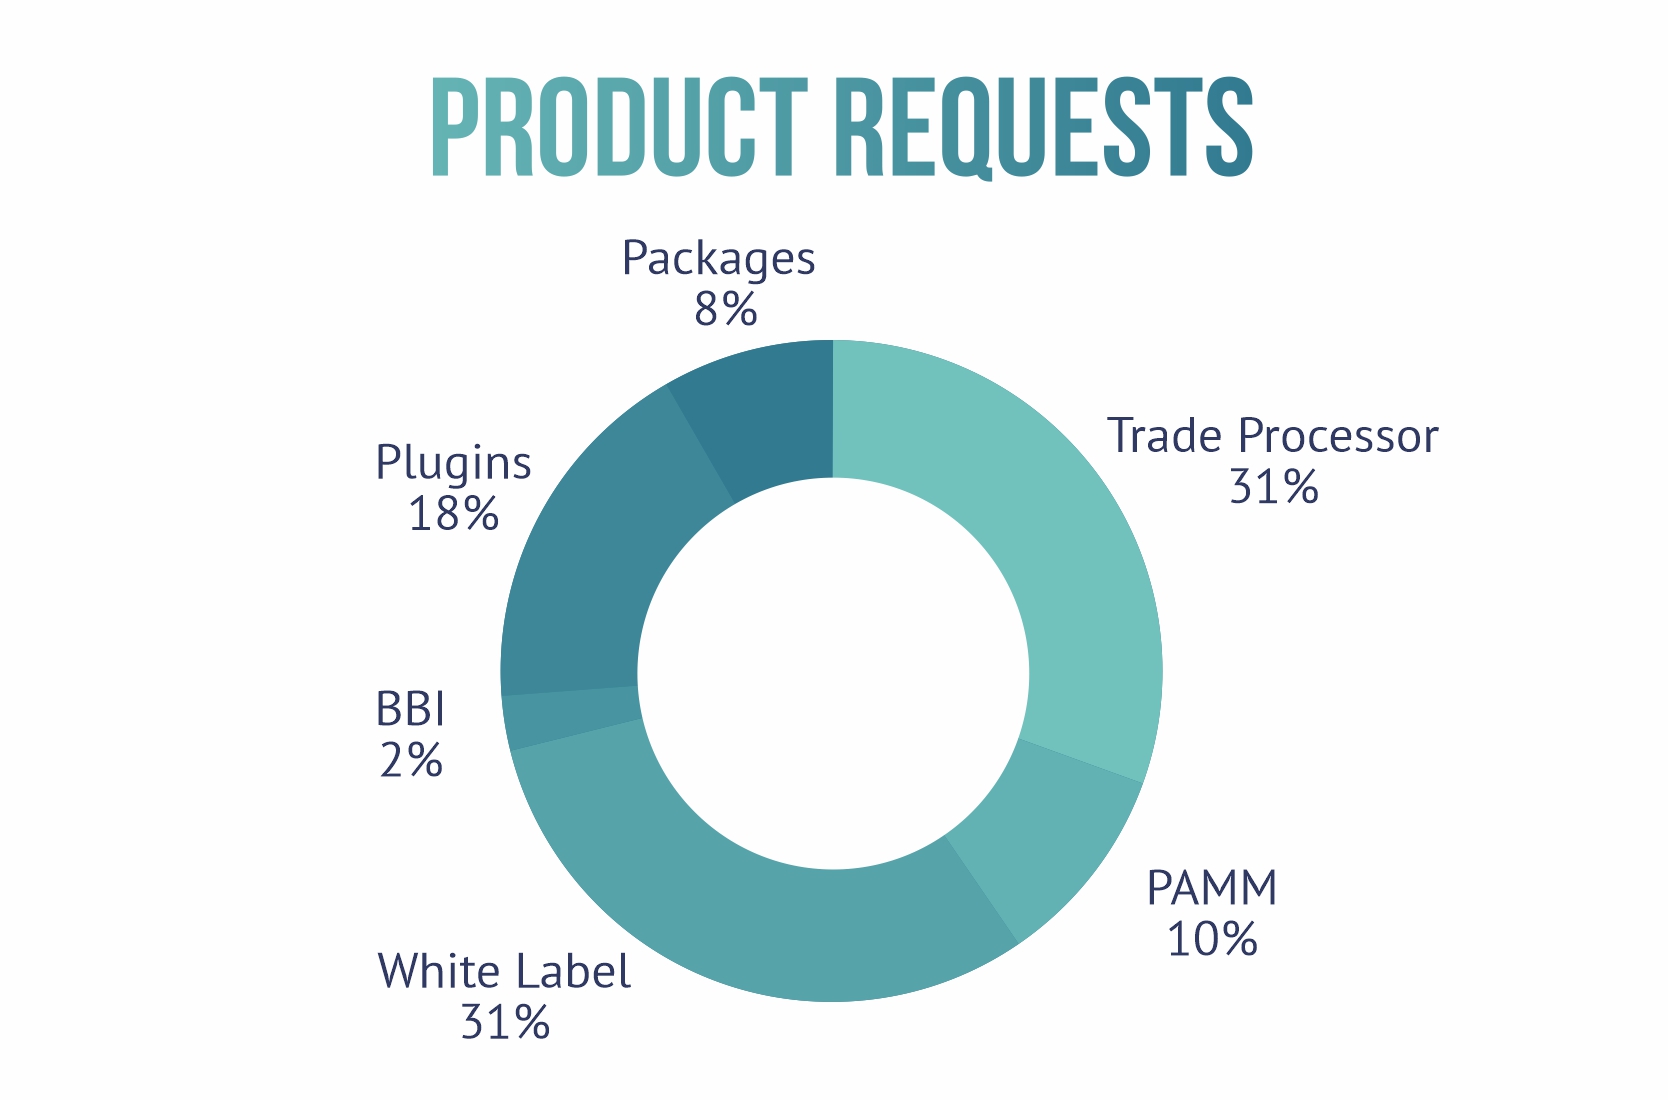 Product requests